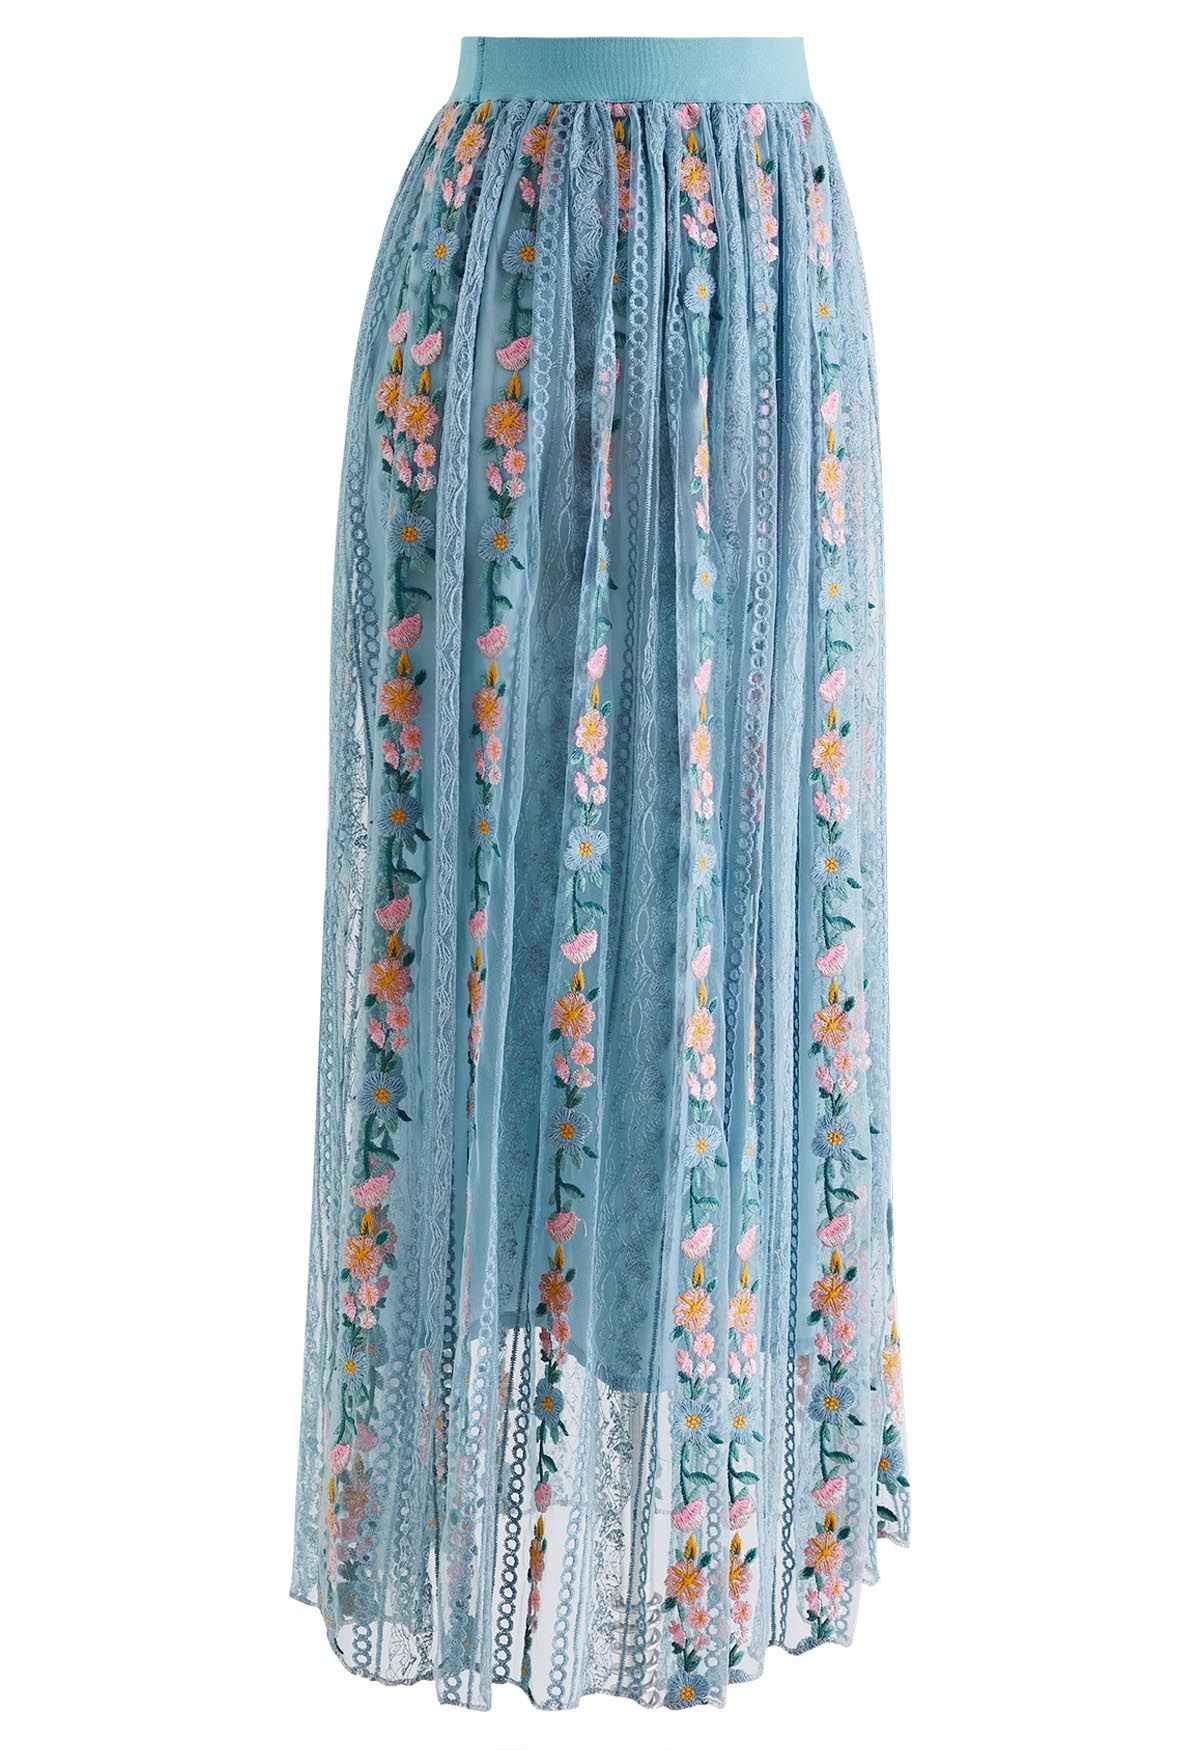 Flower Chain Embroidered Mesh Skirt in Dusty Blue - Retro, Indie and ...